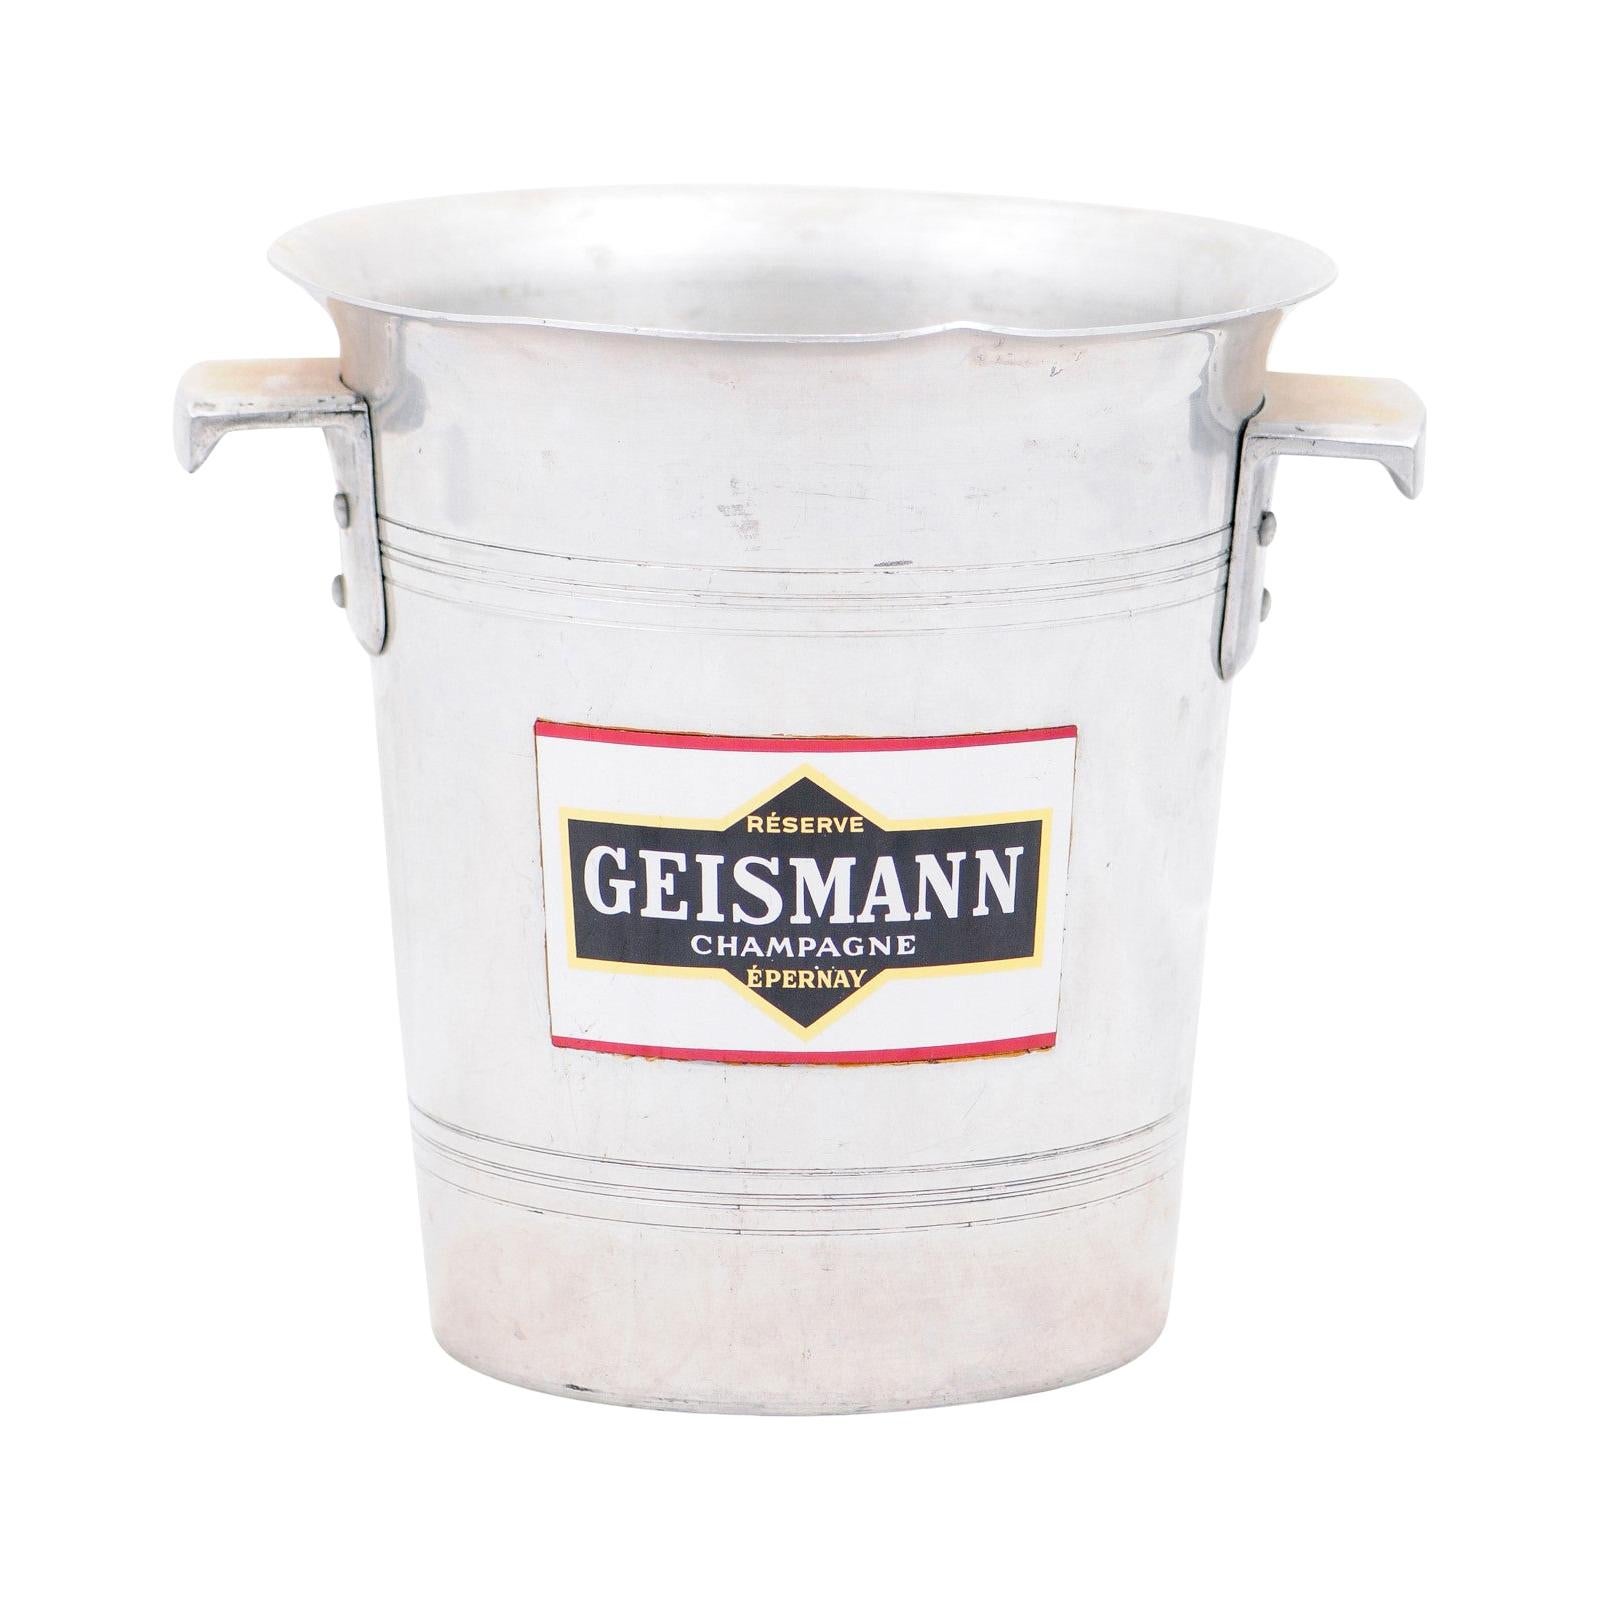 French 19th Century Aluminum Champagne Bucket with Geismann Epernay Label